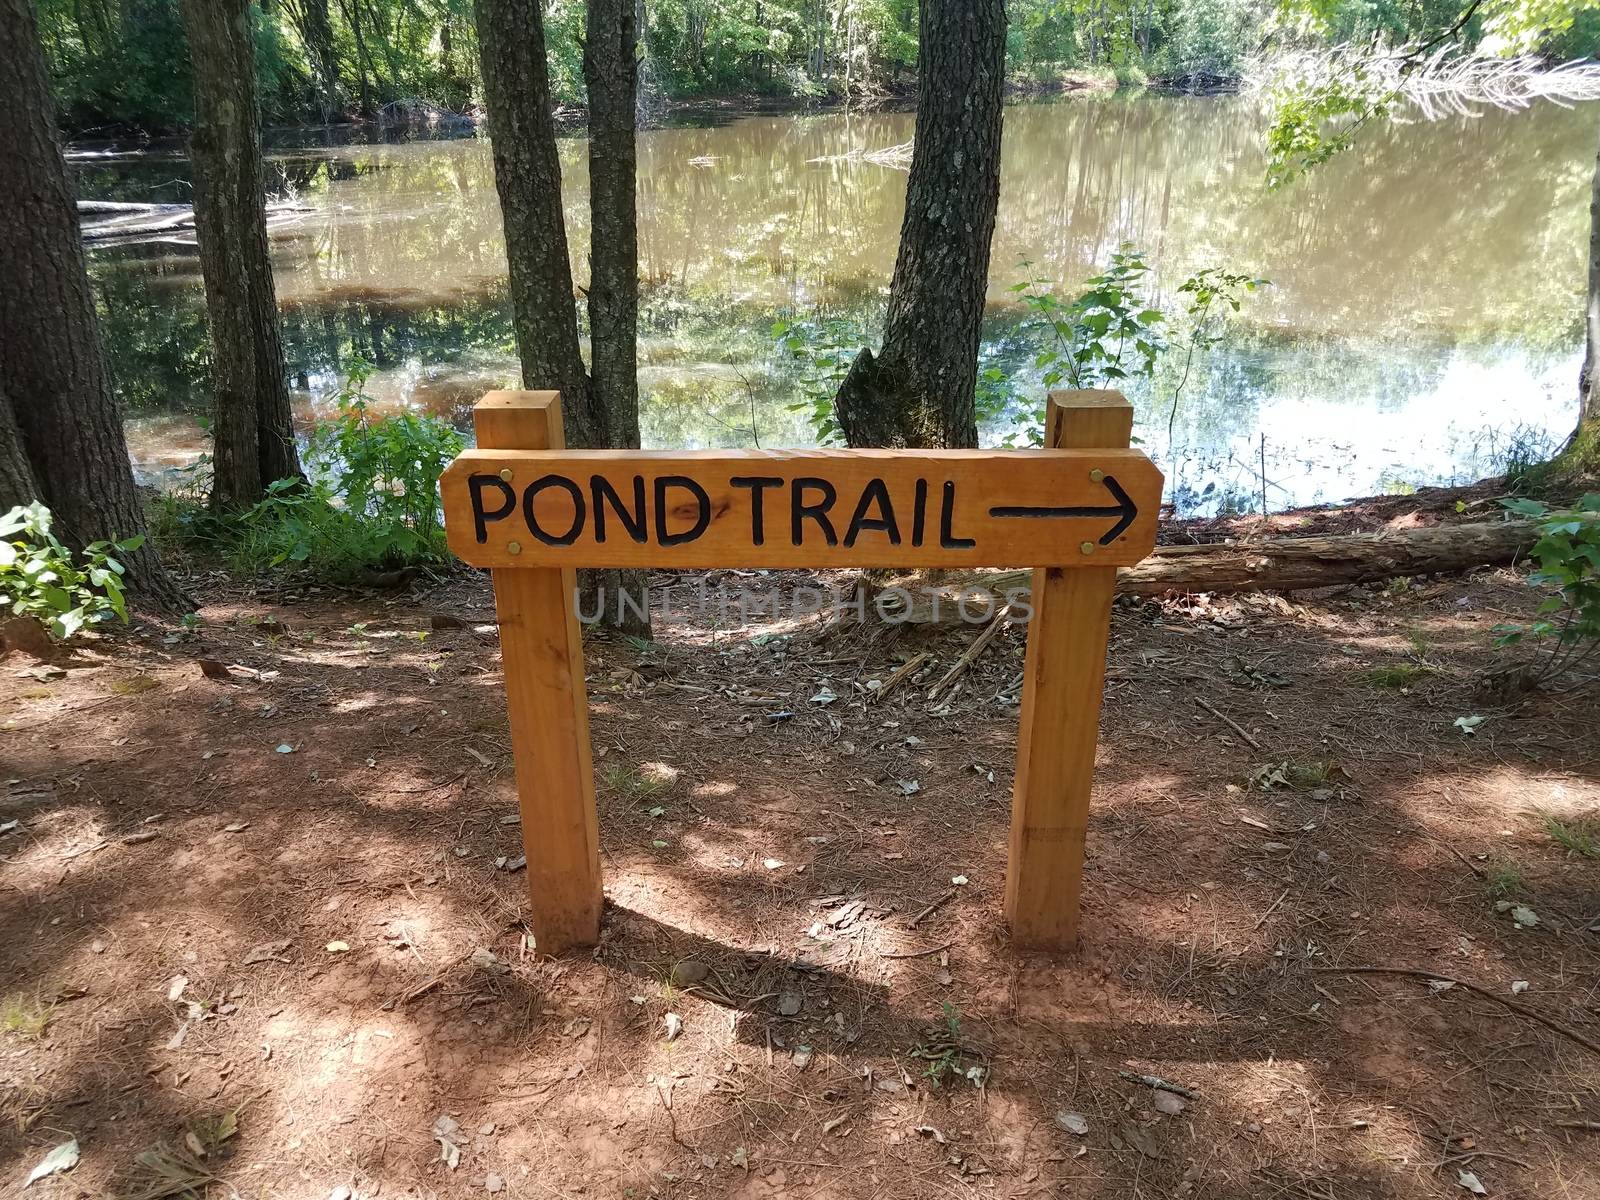 wooden pond trail sign with arrow and lake or pond water